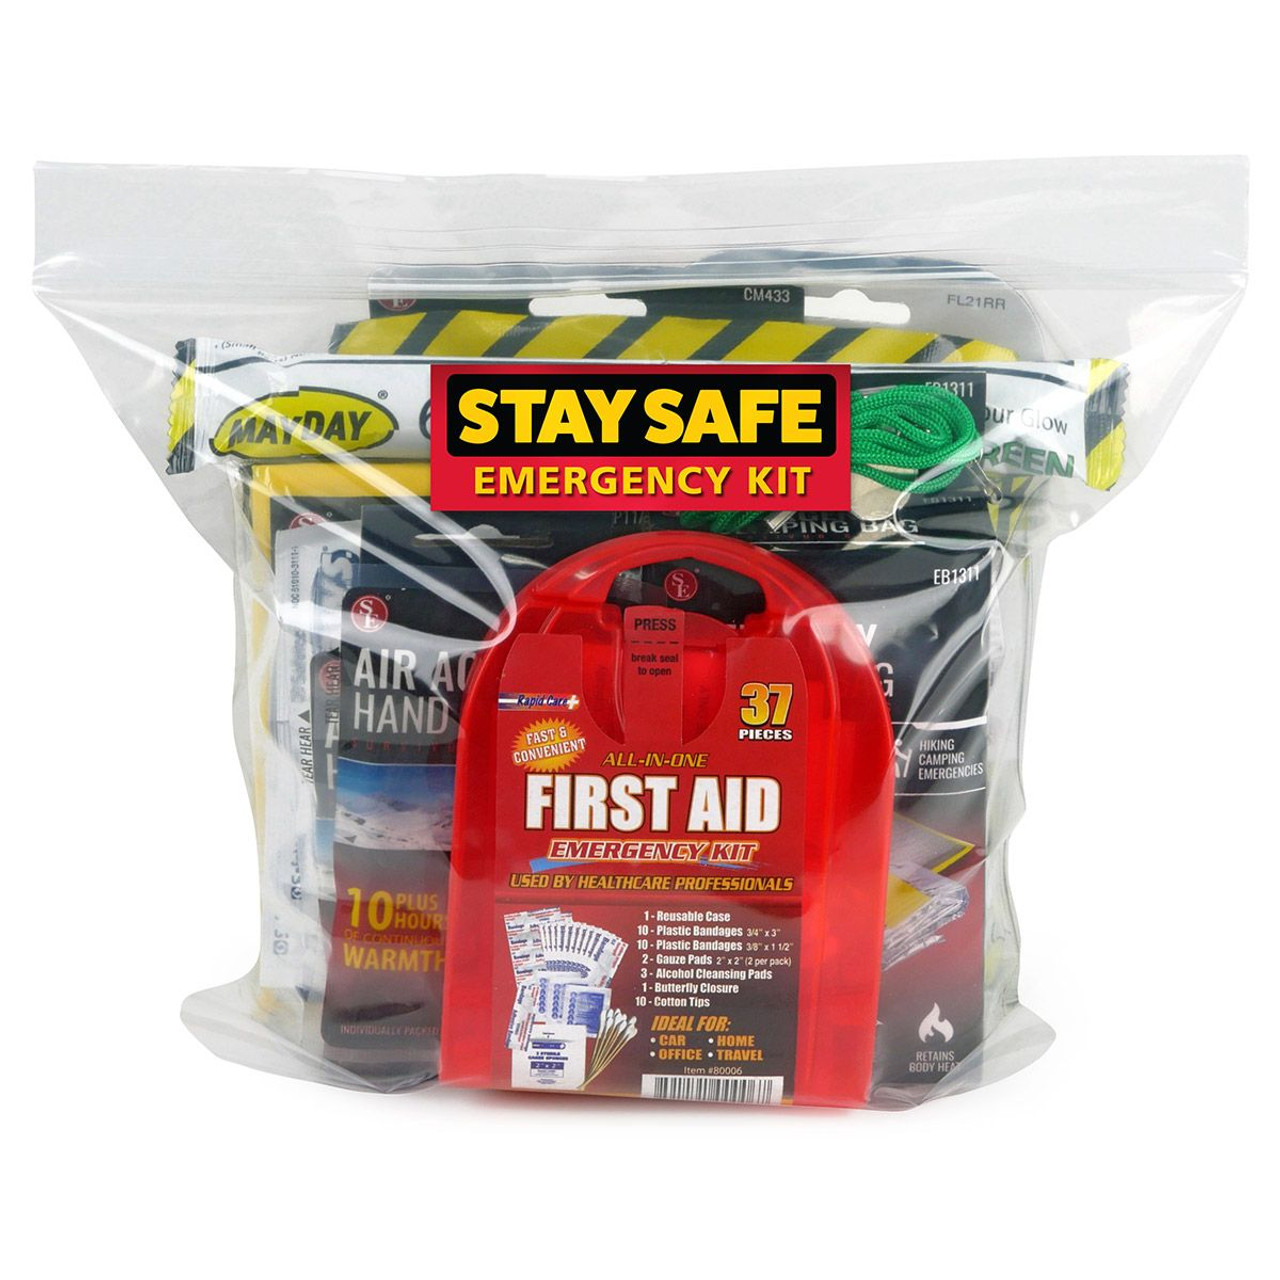 STAY SAFE Homeless Care Emergency Survival Kit with Food Water - 19 piece -  Office Emergency Kits